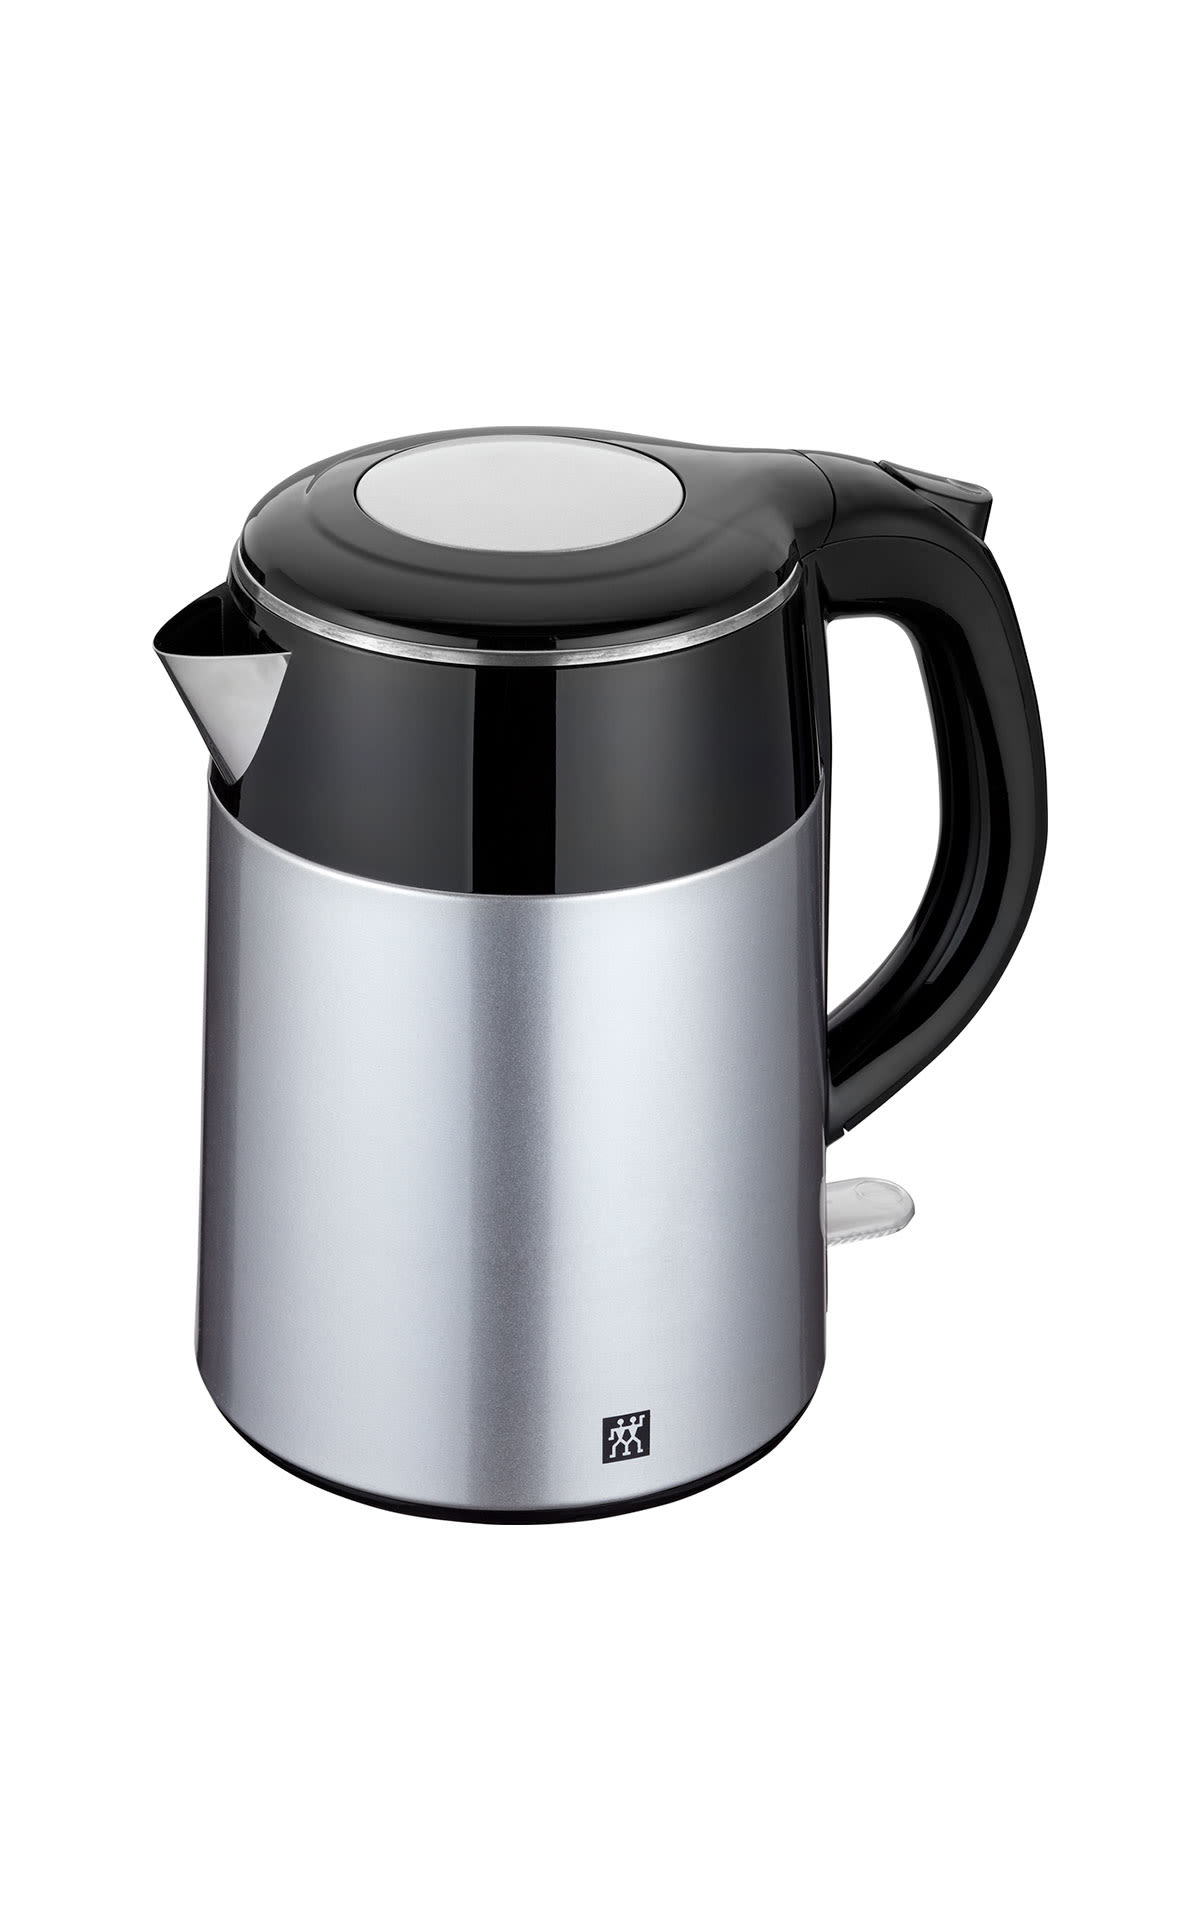 1.2L electric kettle Zwilling